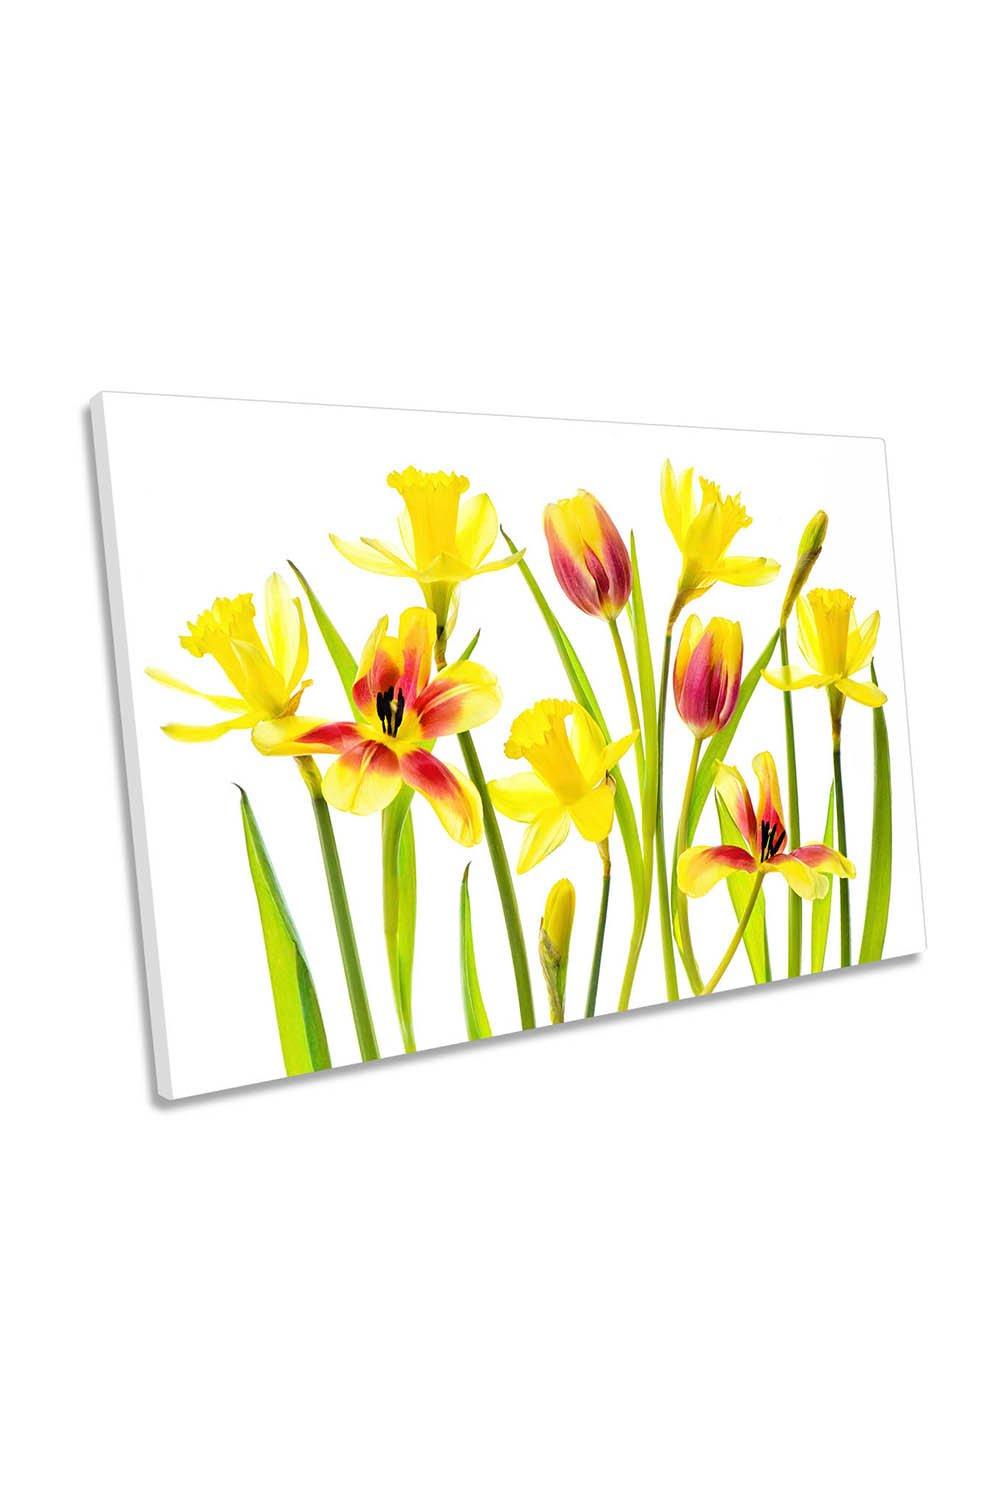 Vibrant Spring Yellow Flowers Canvas Wall Art Picture Print